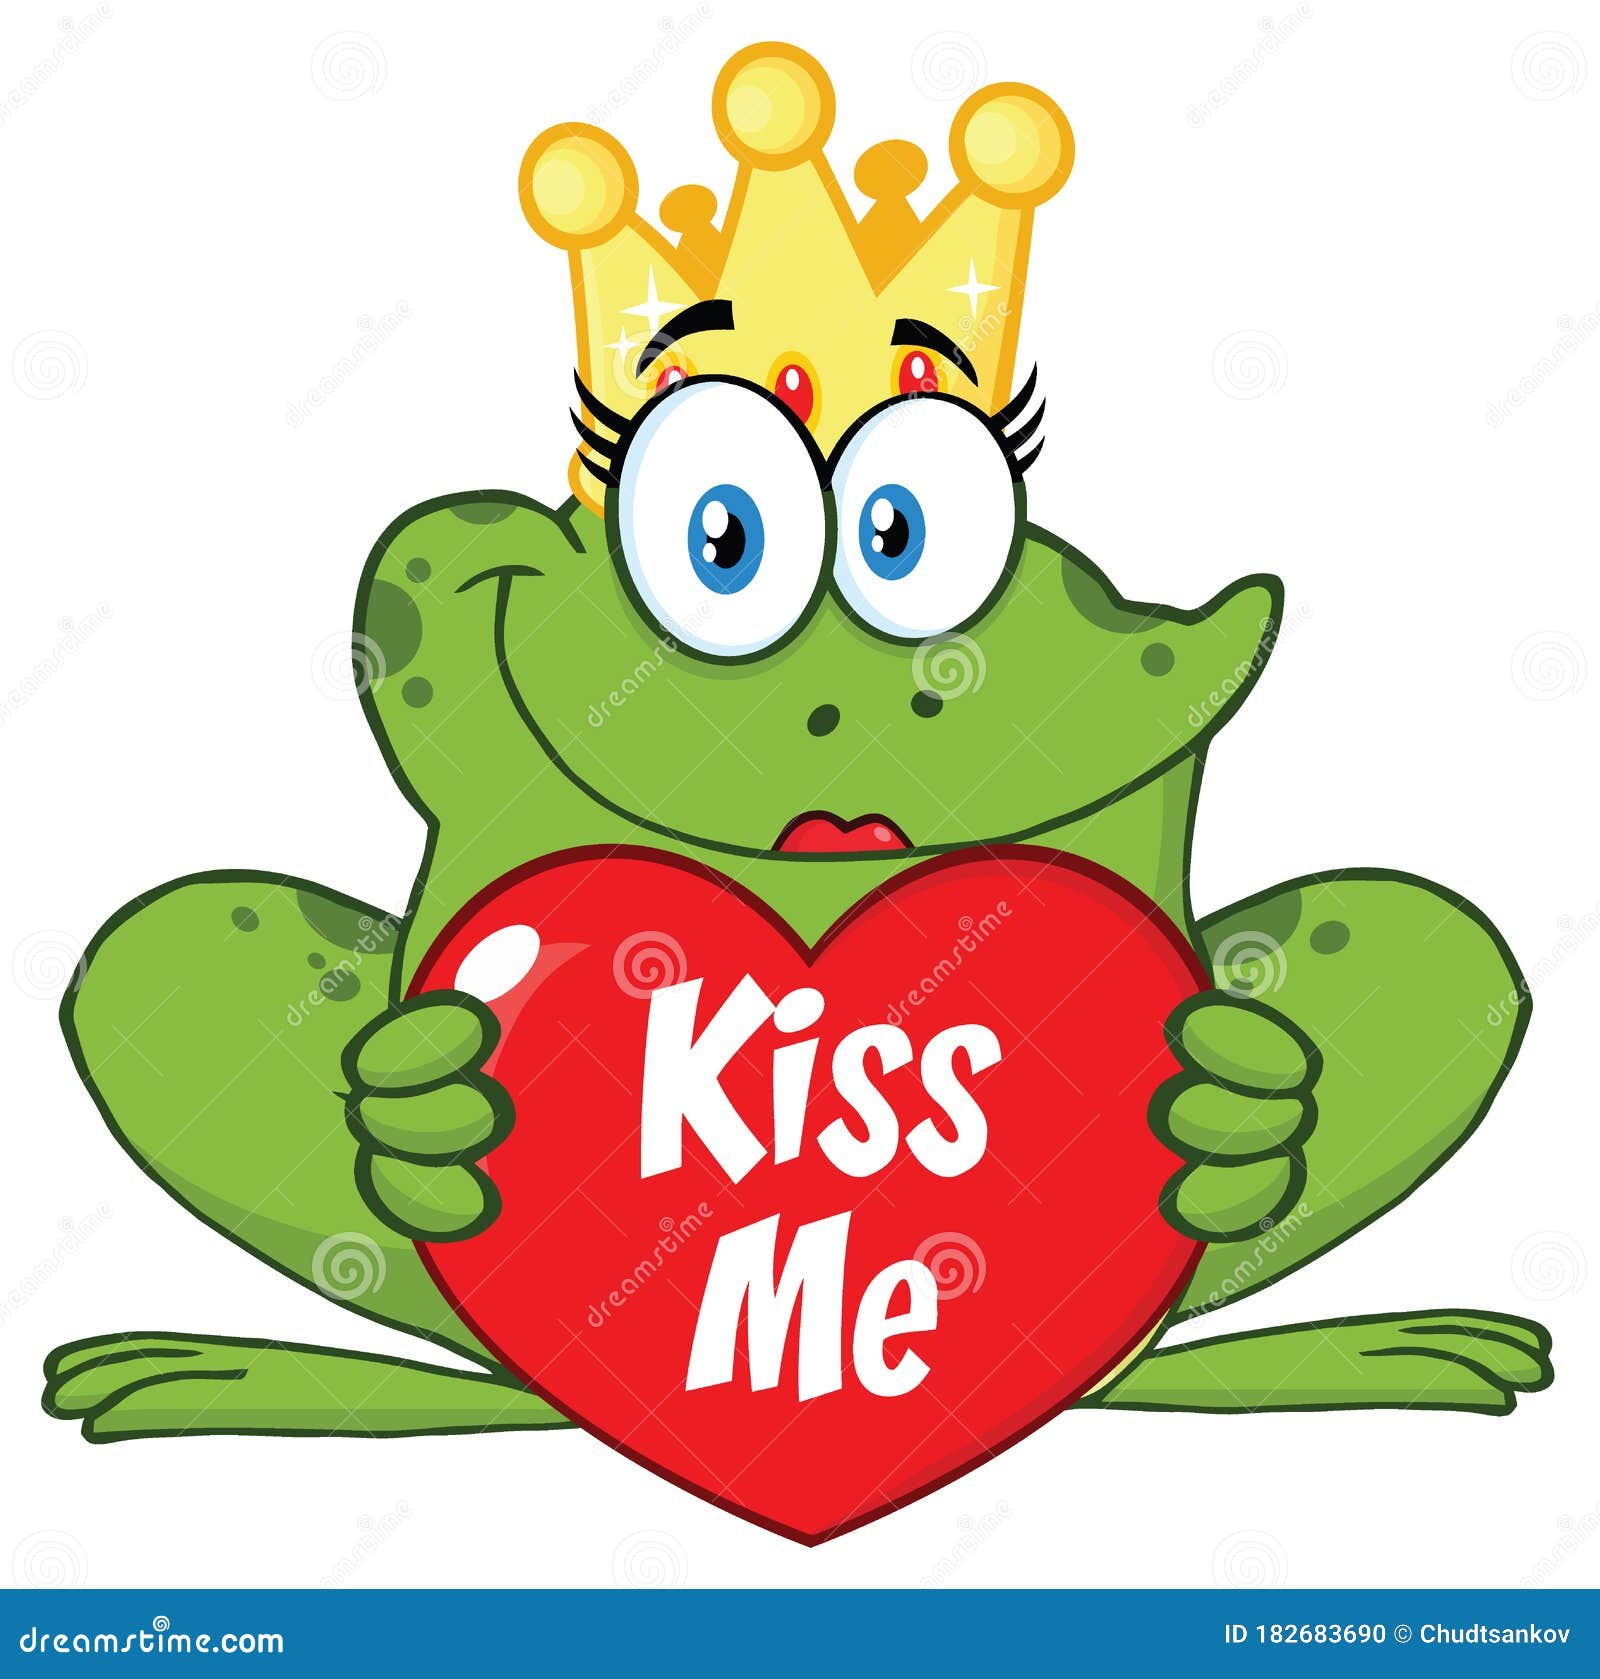 Cute Princess Frog Cartoon Mascot Character with Crown Holding a Love Heart  with Text Kiss Me Stock Illustration - Illustration of female, greeting:  182683690